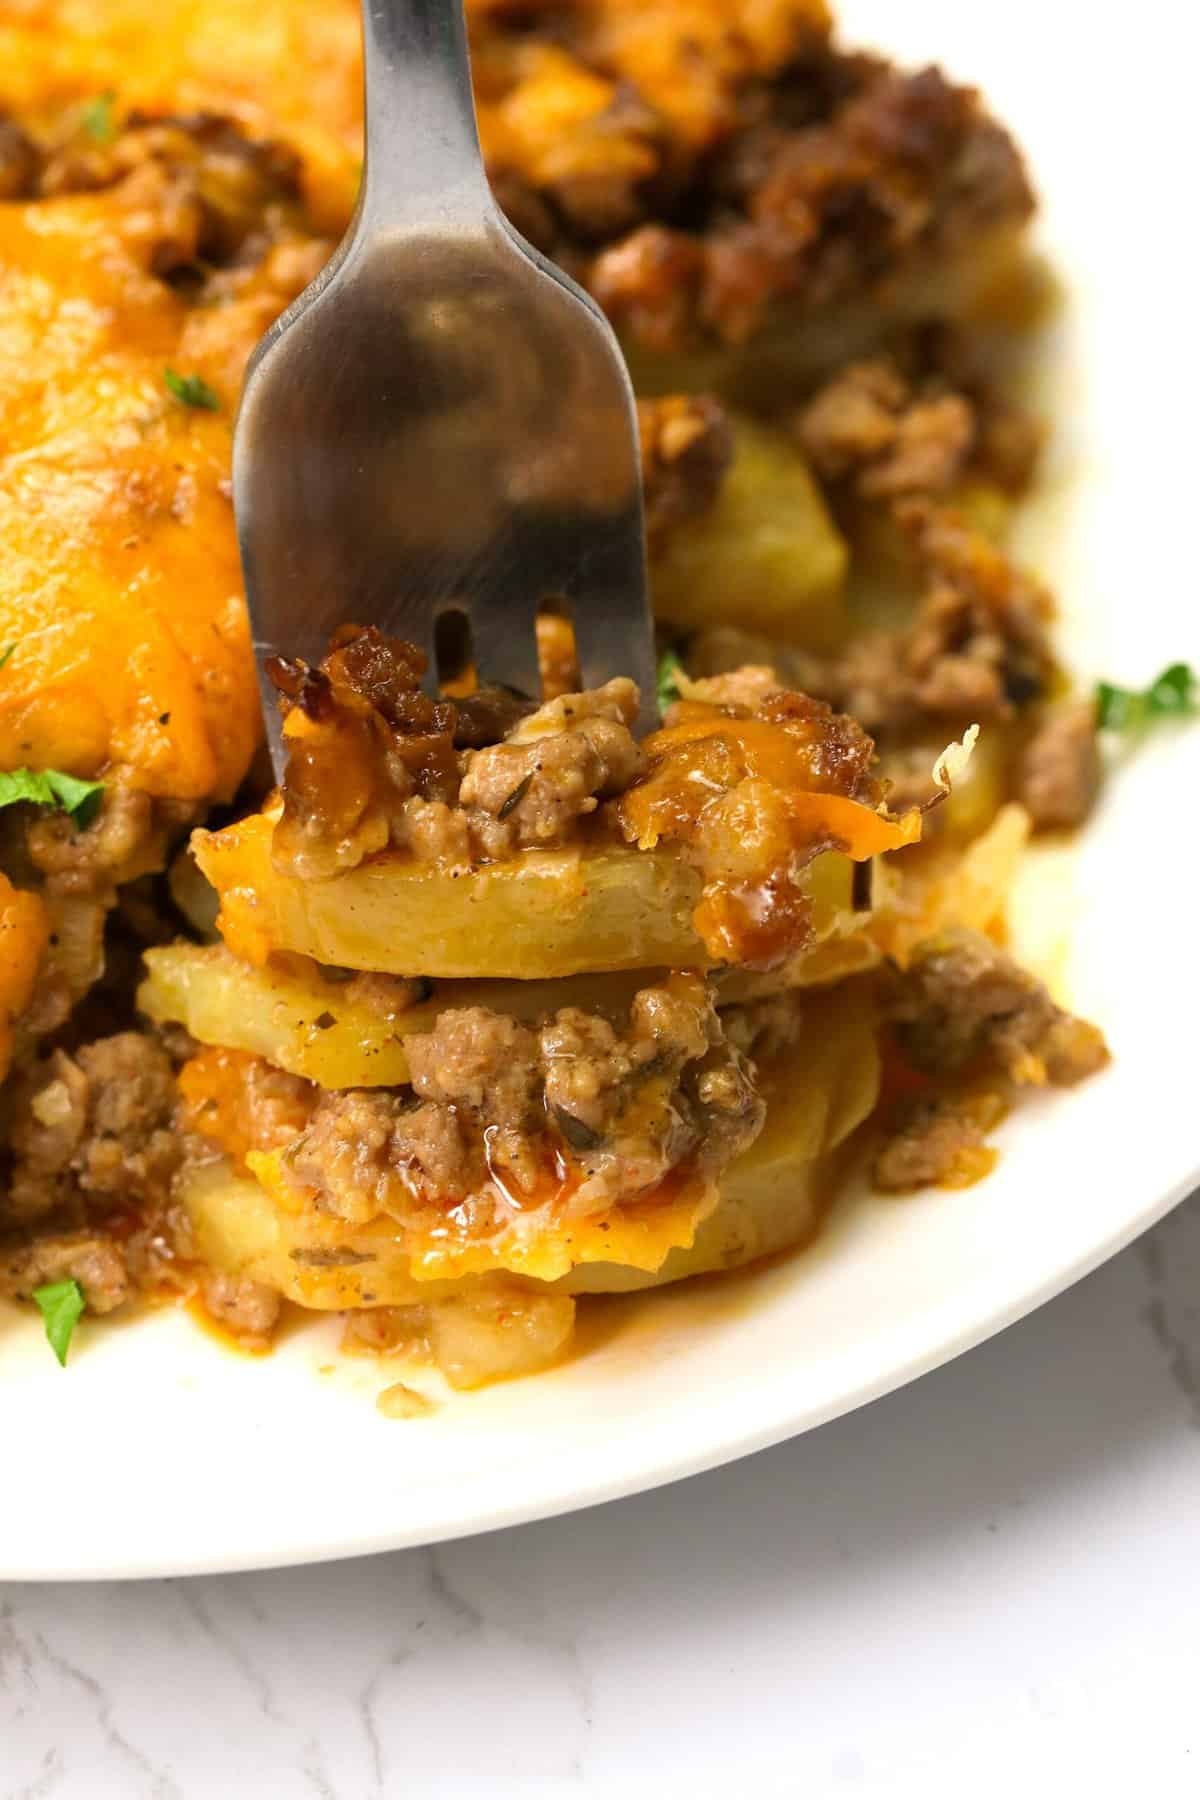 Digging into tasty Ground Beef and Potato Casserole